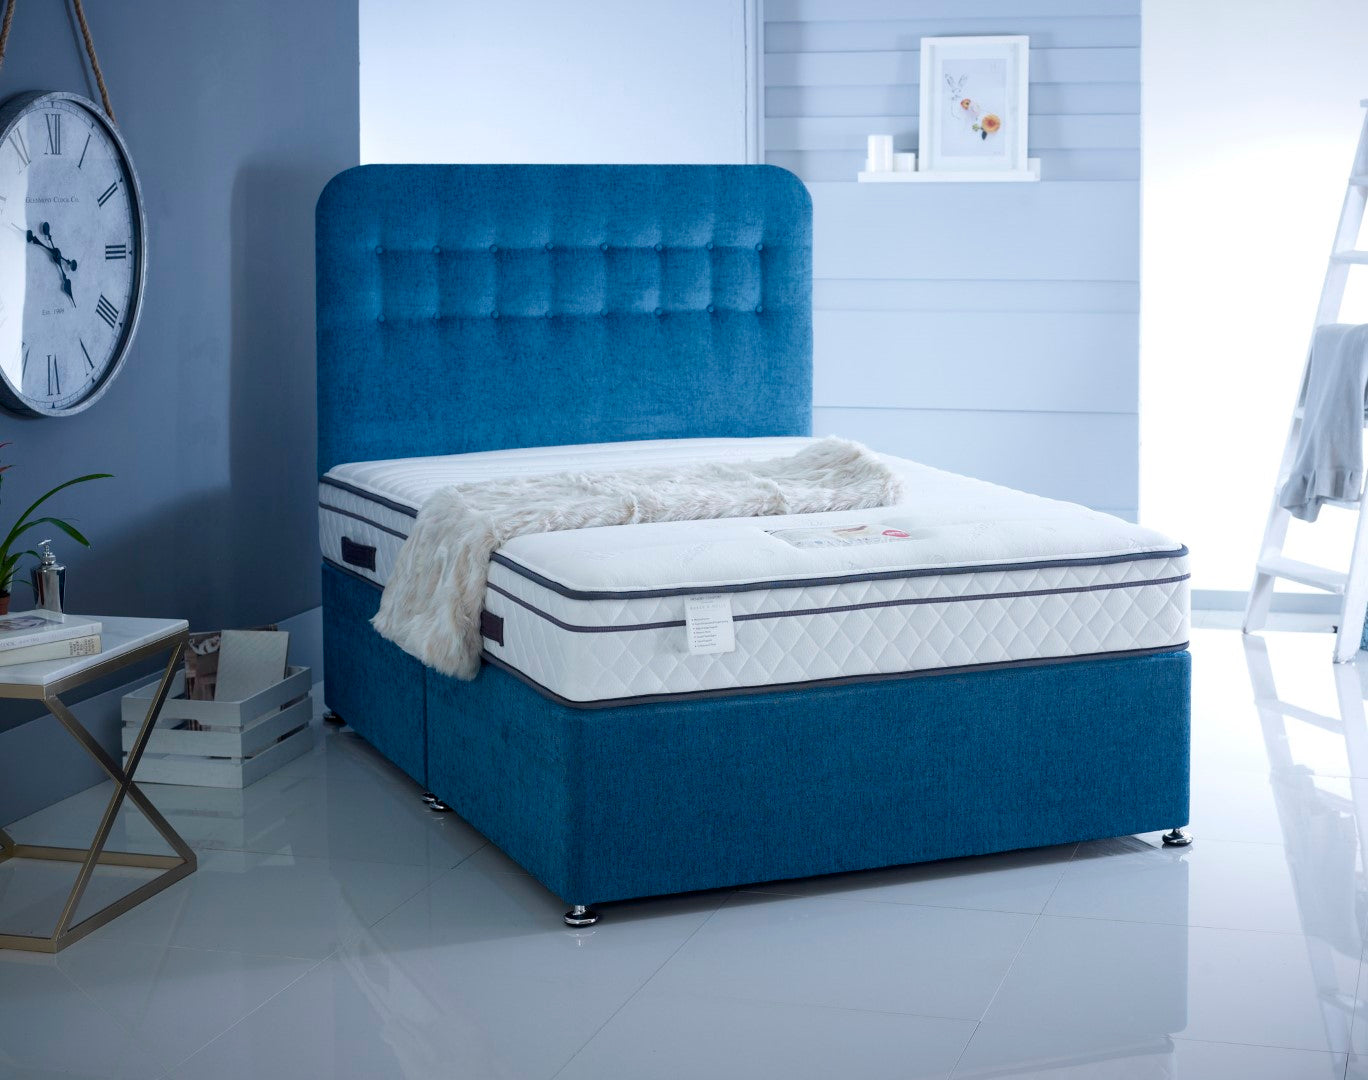 Baker and Wells Memory Comfort mattress Express Delivery